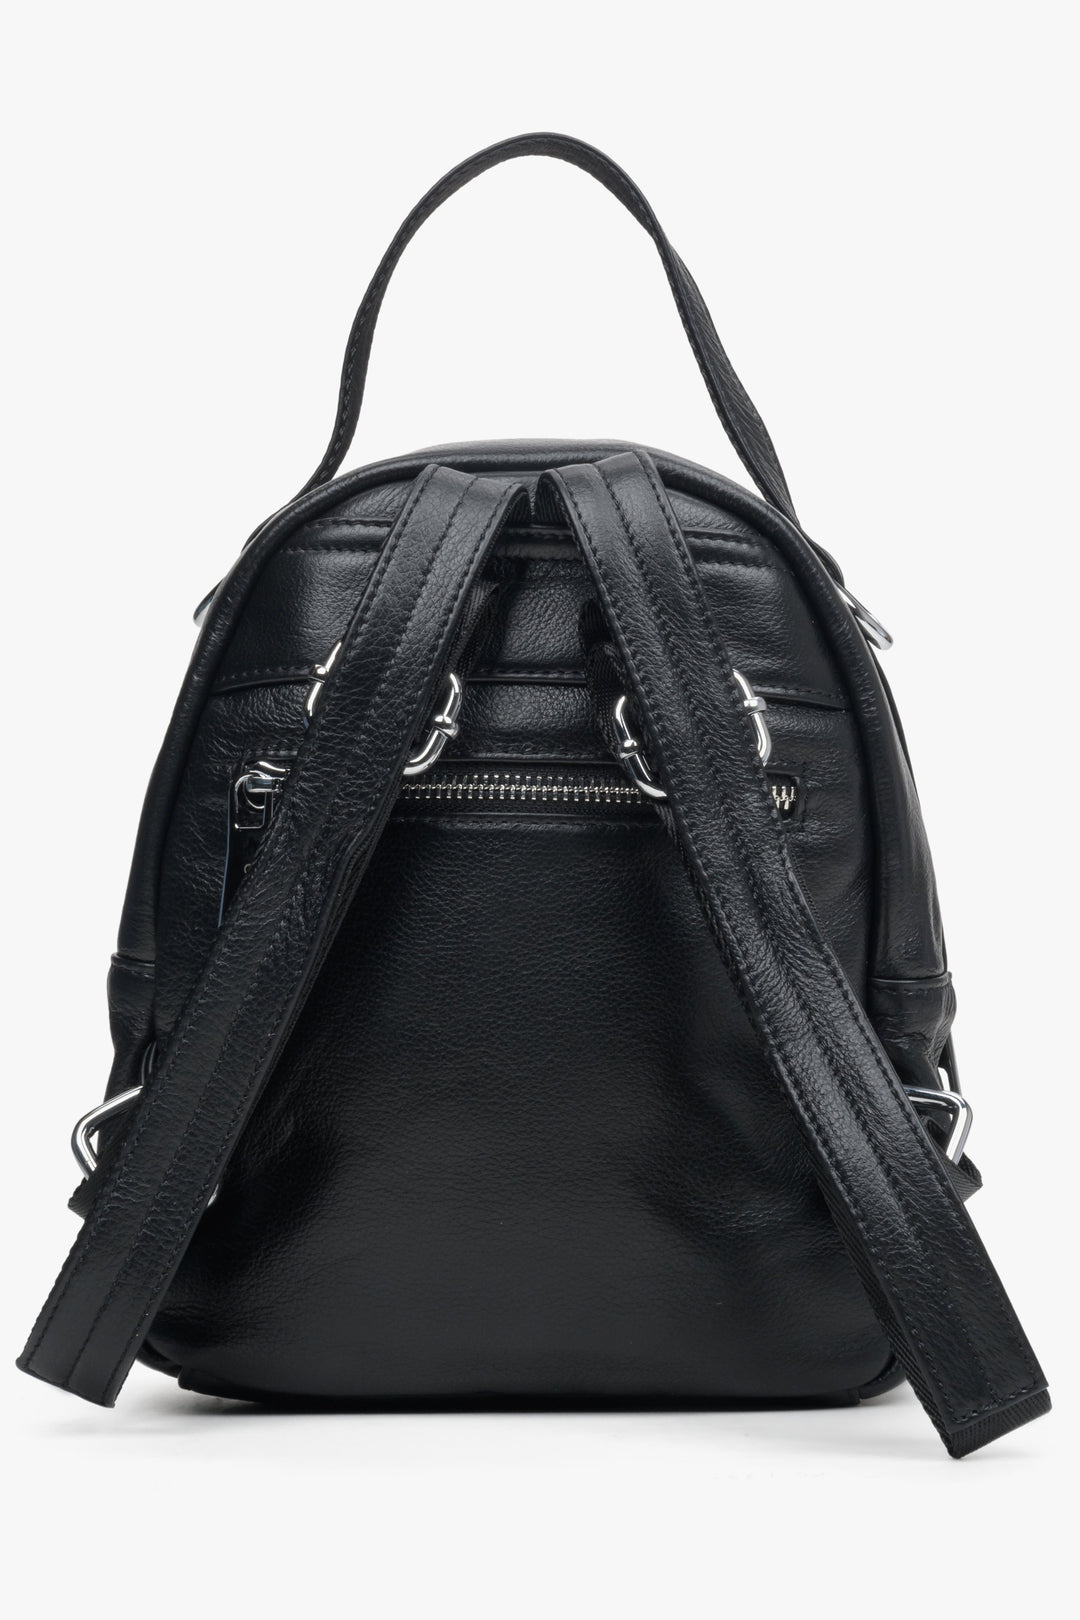 Urban, women's black backpack by Estro made of genuine leather - close-up of the back of the model.